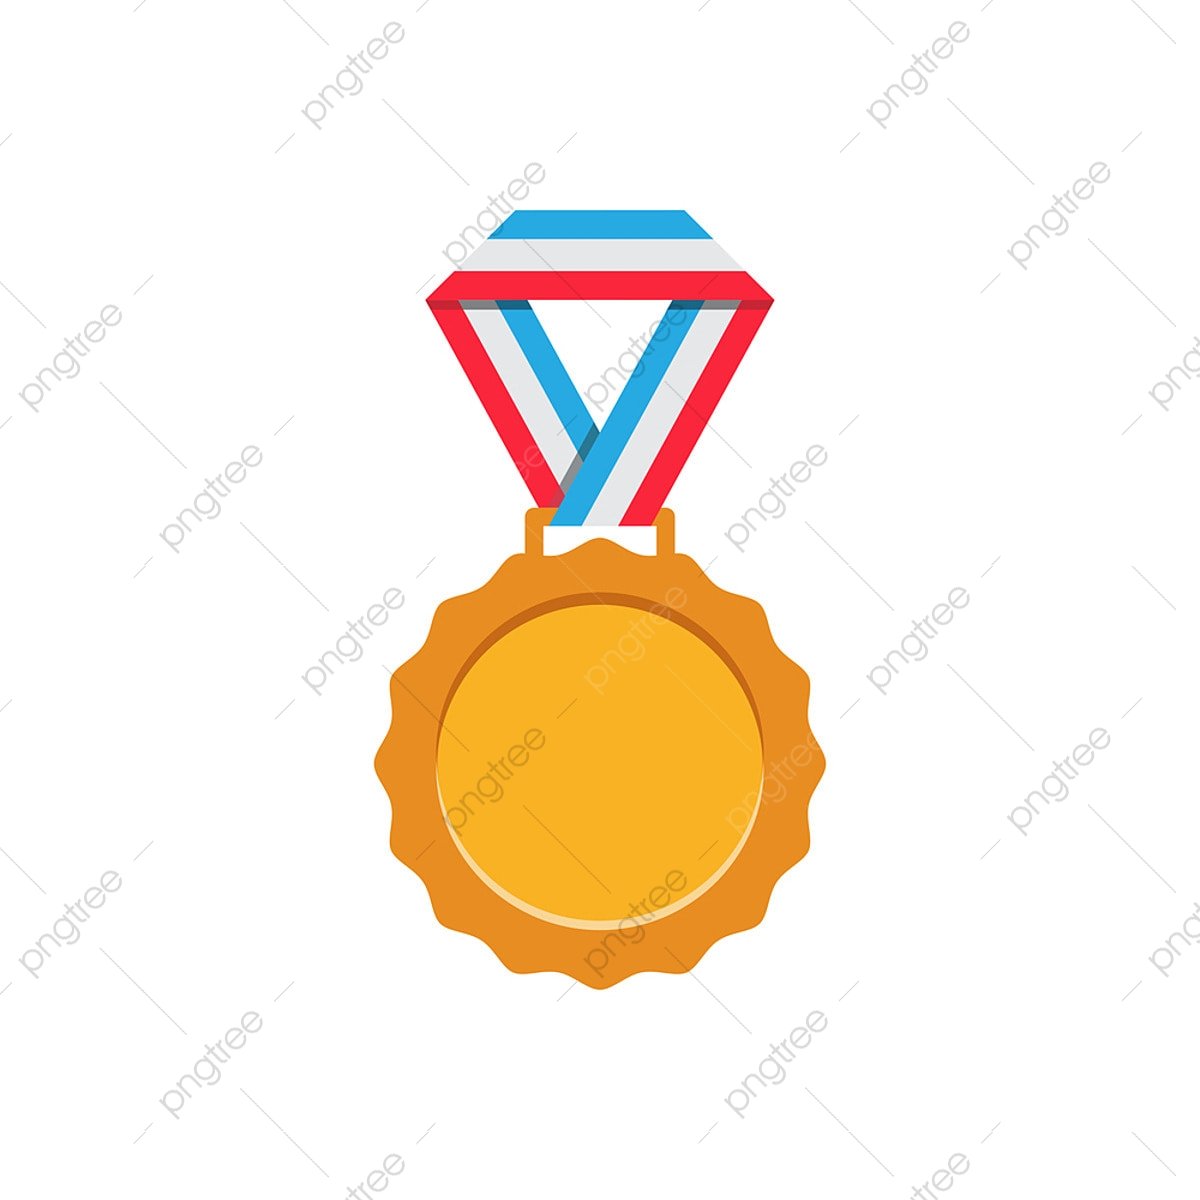 pngtree award vector icon certificate best png image 7855346